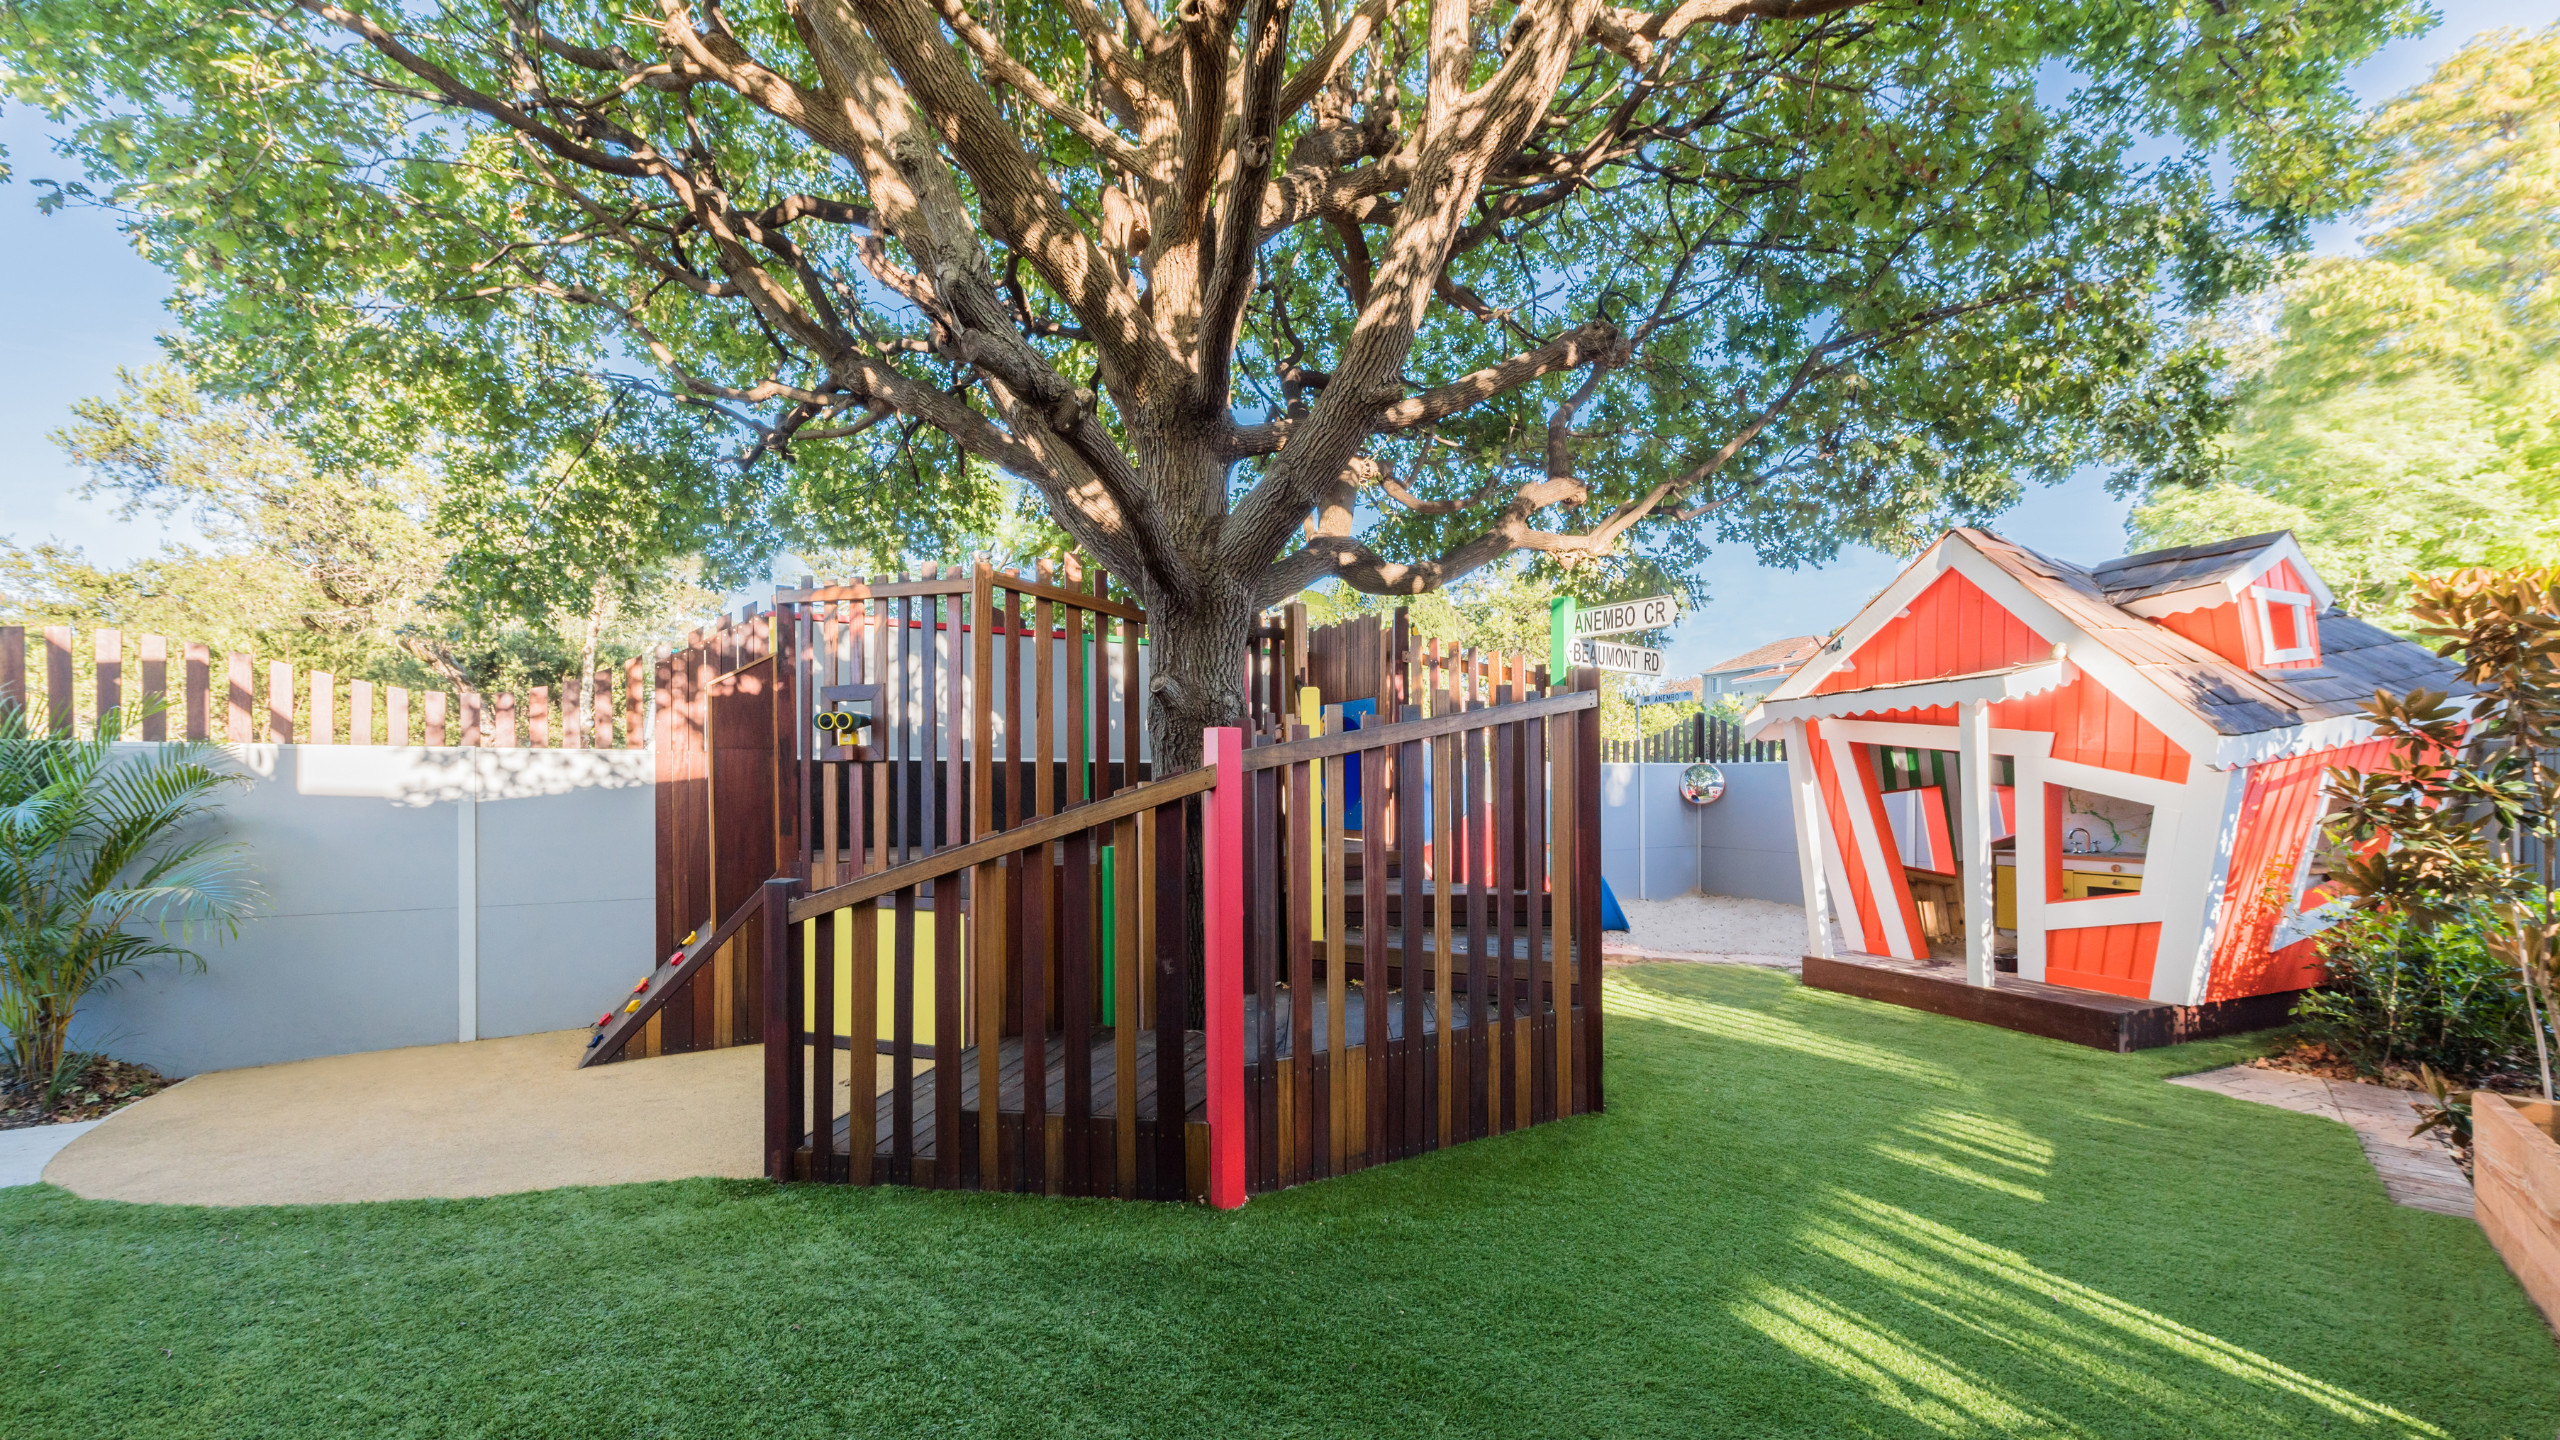 SlimWall combines acoustic barrier with retaining wall for Maroubra Childcare Centre